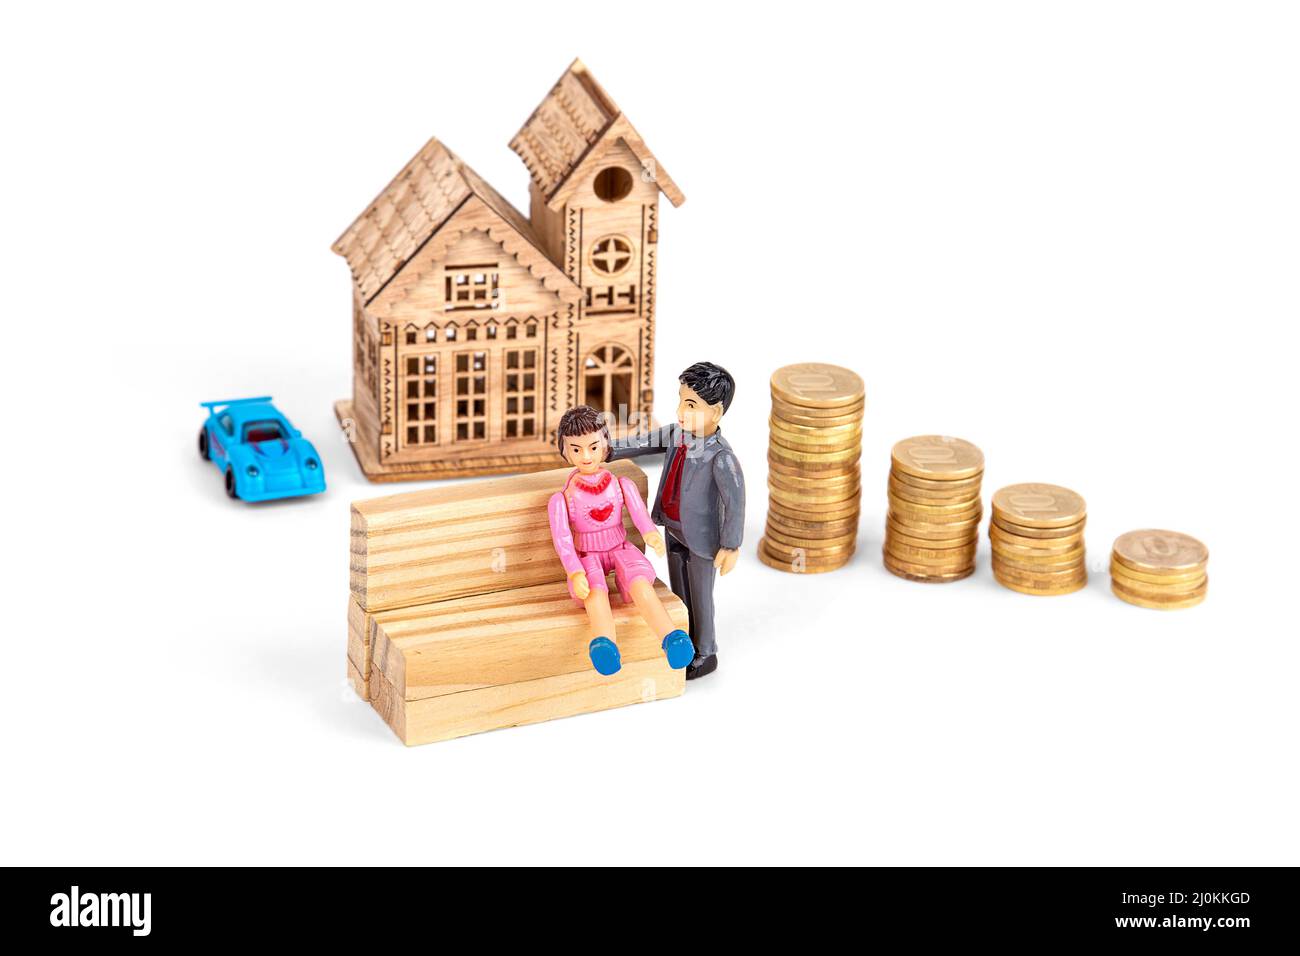 Toy figures of people, on the background of a wooden house and stacks of coins, on a white background Stock Photo